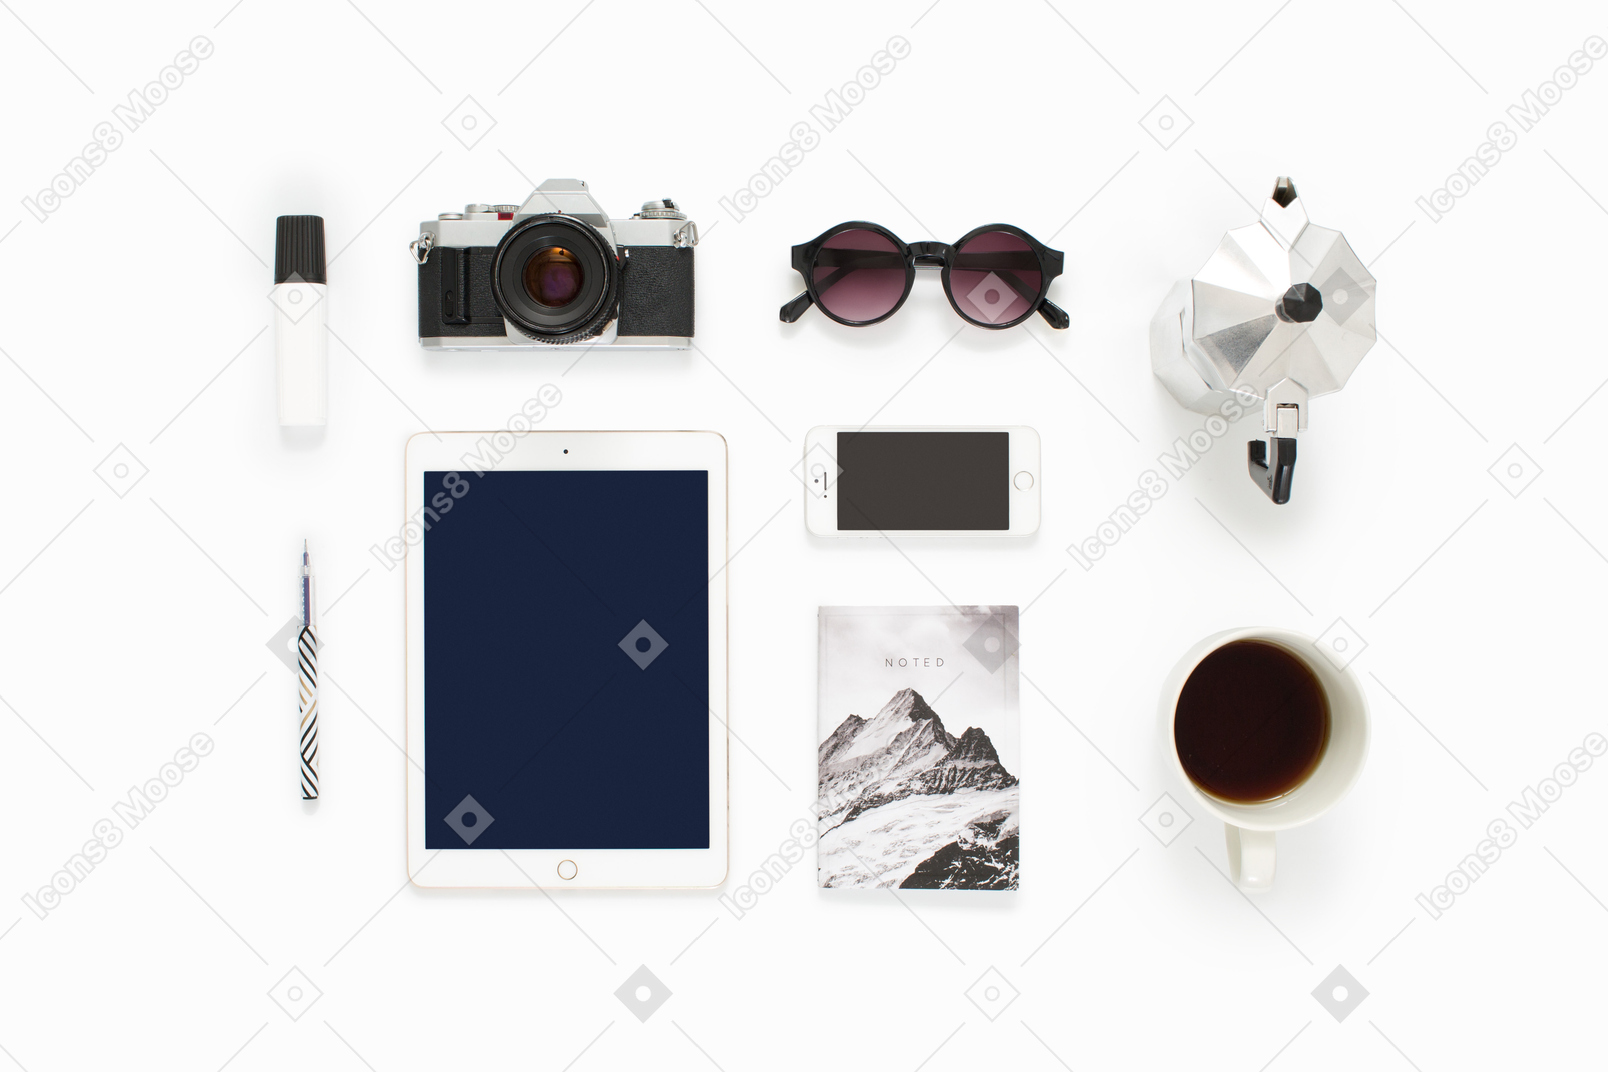 Blogger's accessories arranged in perfect order